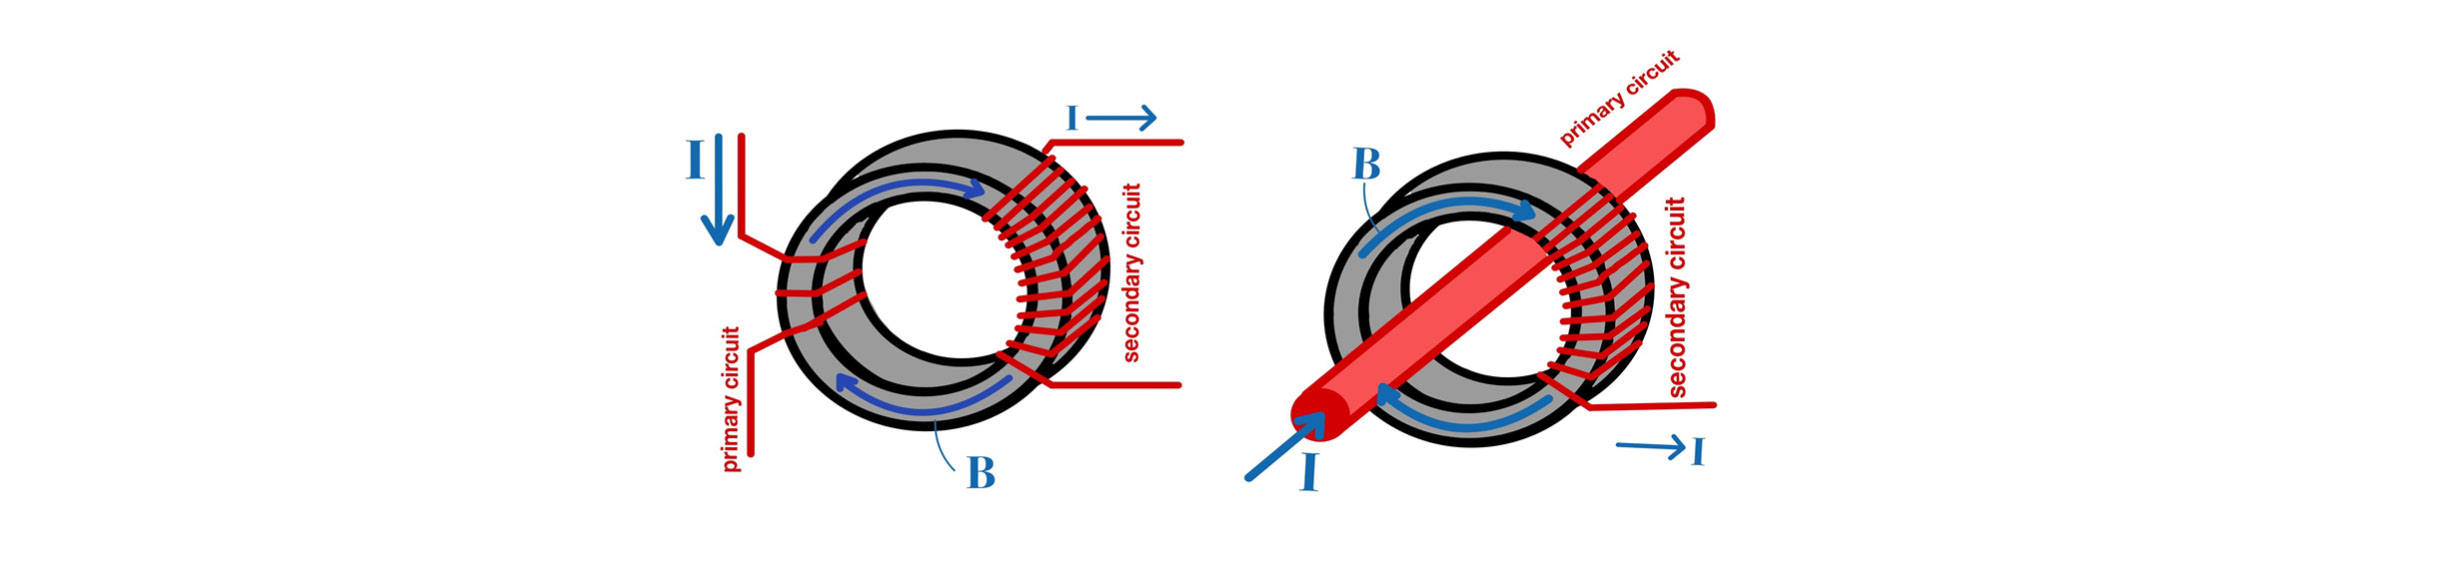 schematic construction of a current transducer